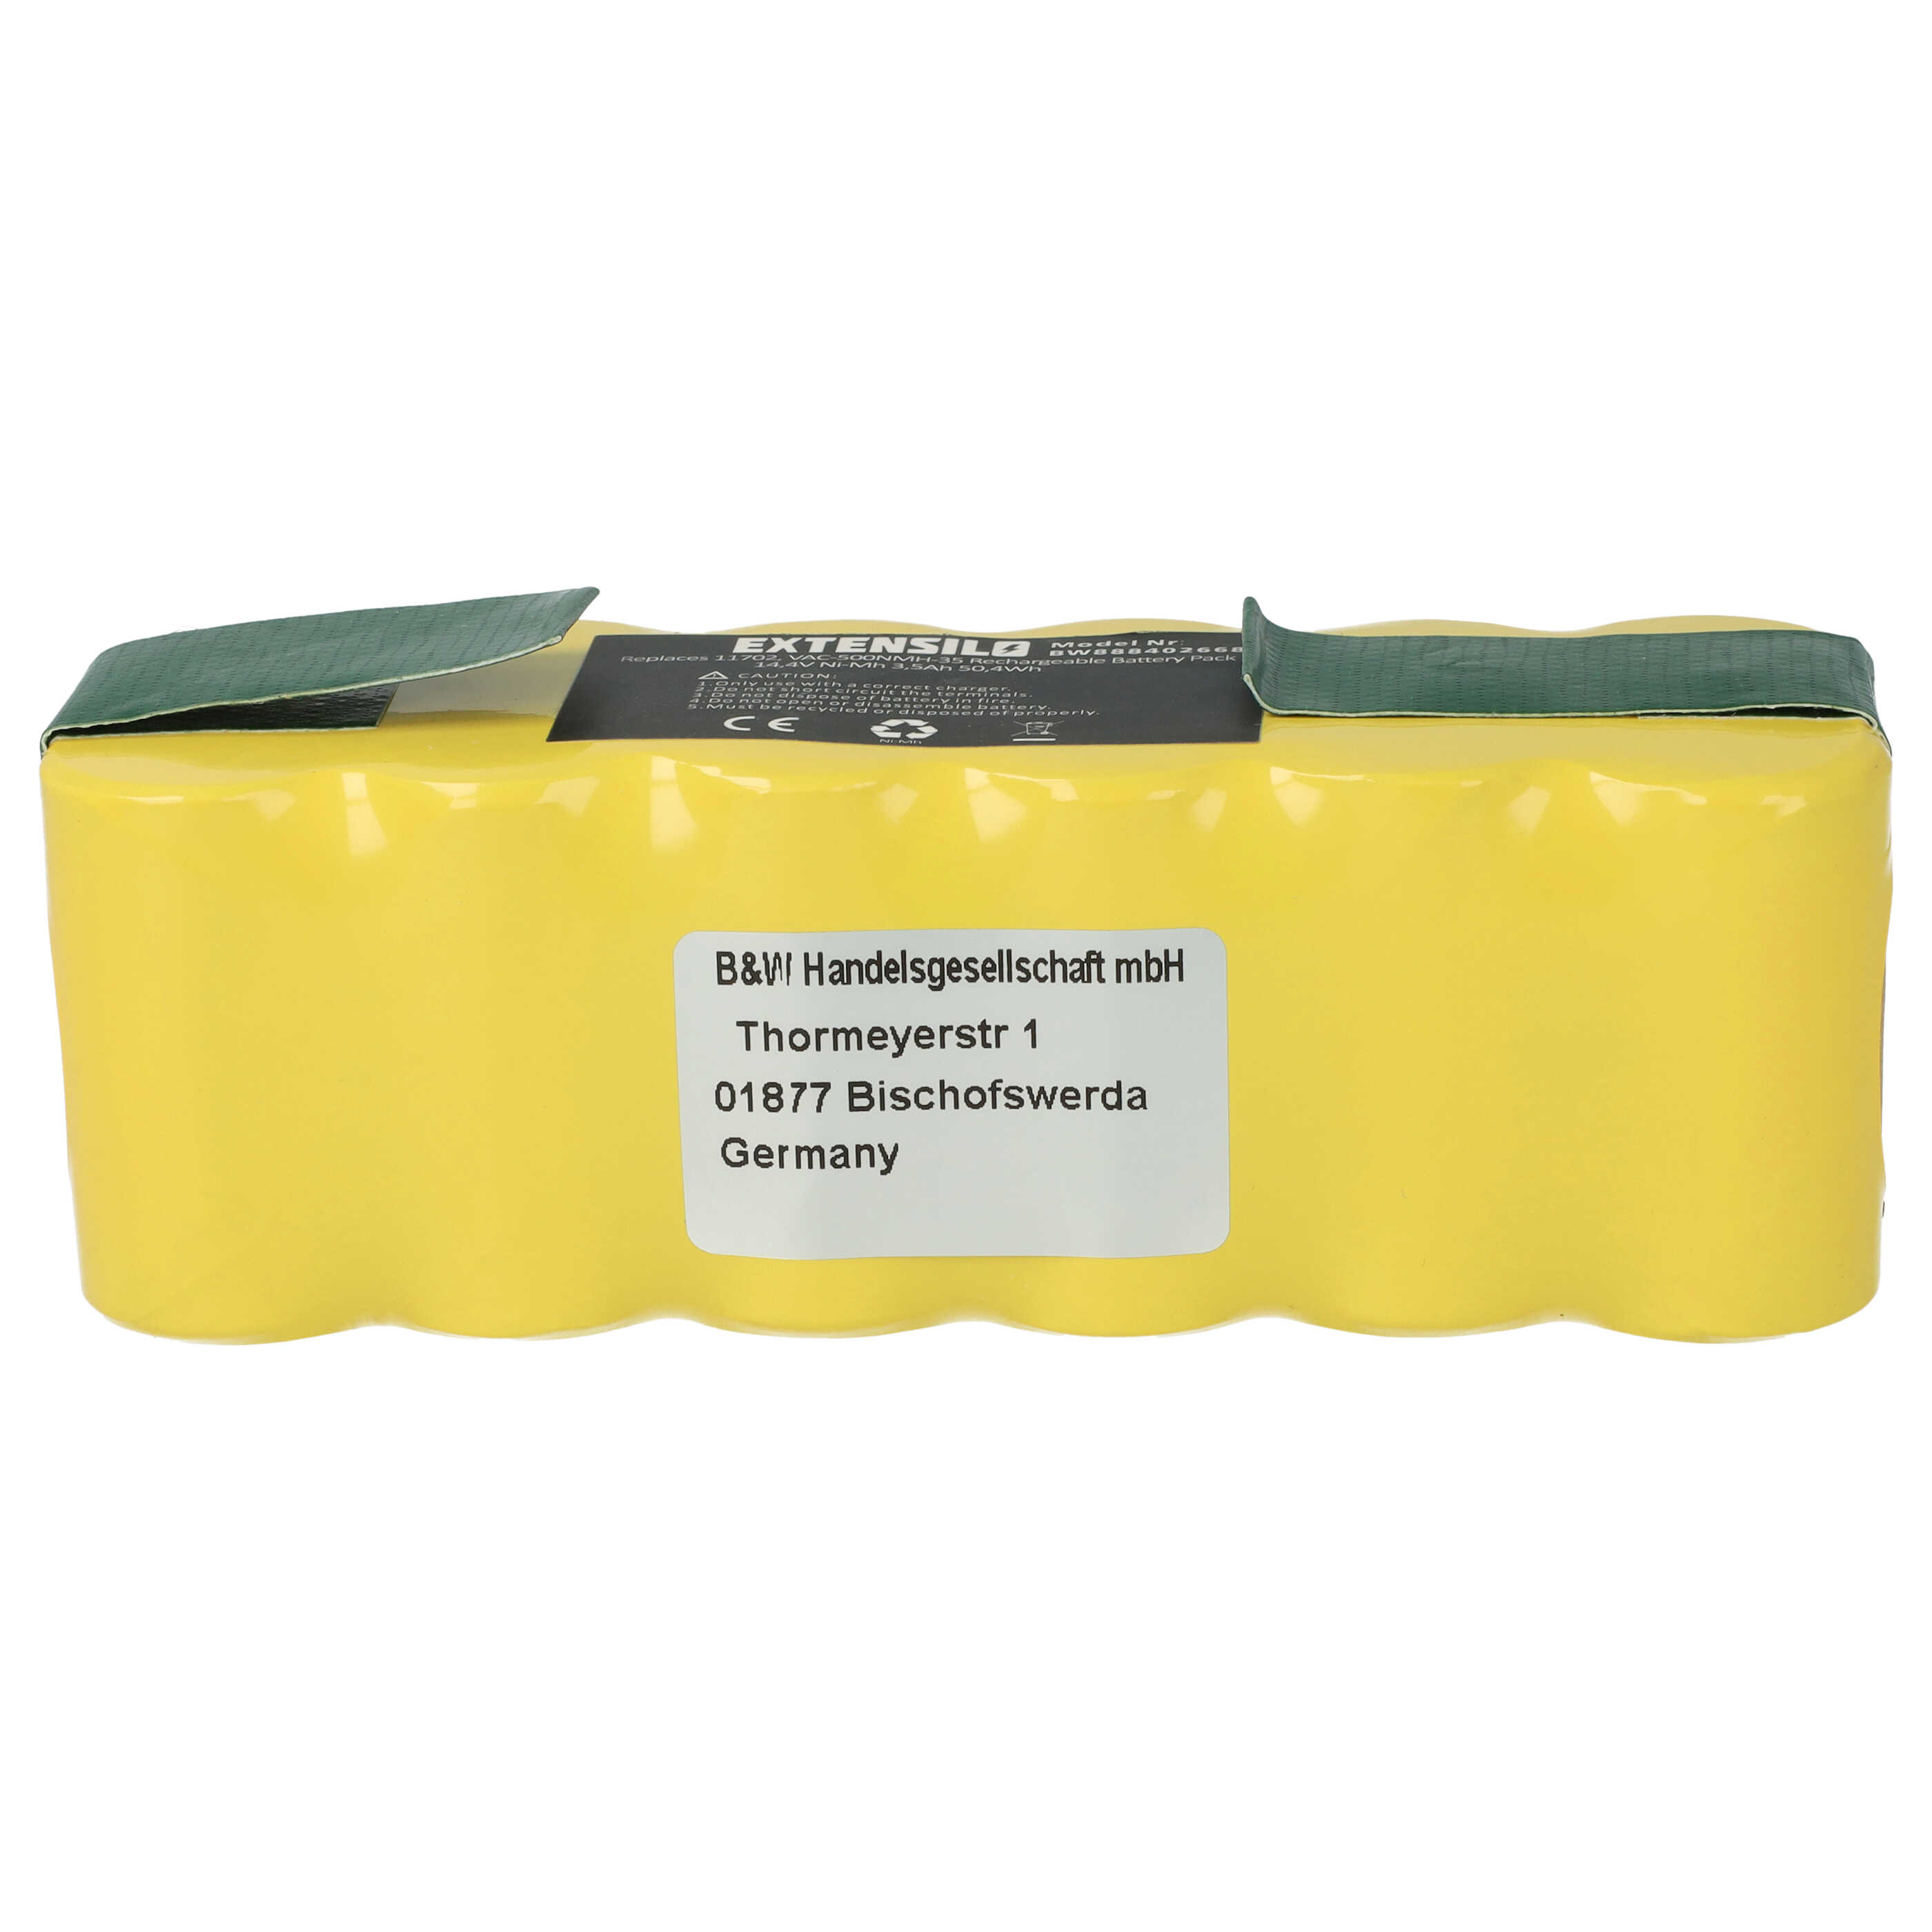 Battery Replacement for 80501e, 80601, 11702, 68939, 80501, 855714, 4419696 for - 3500mAh, 14.4V, NiMH